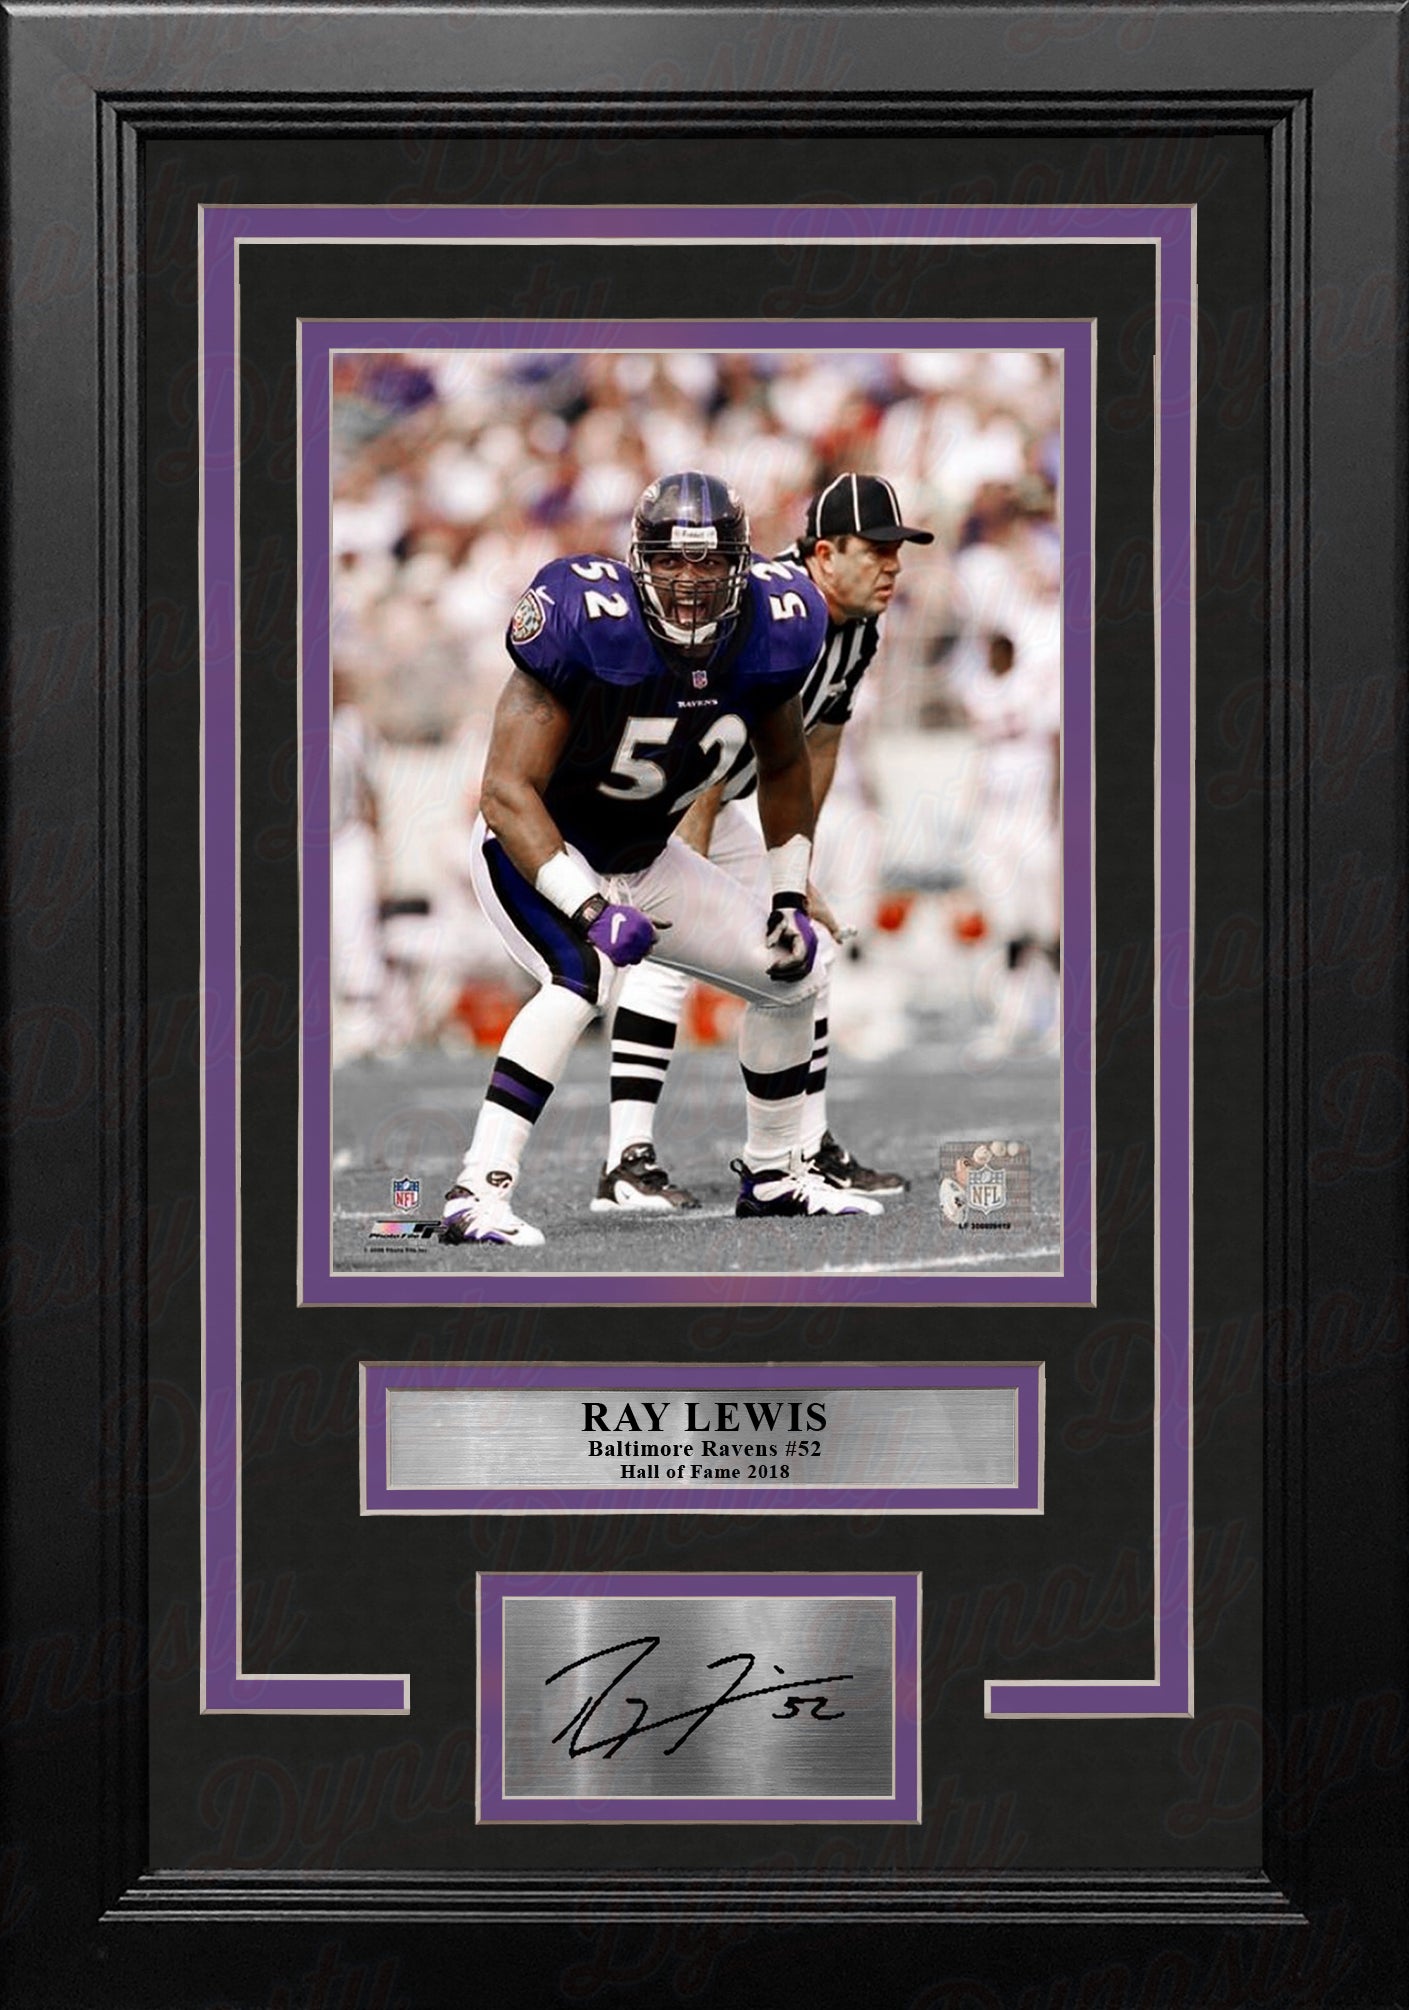 Ray Lewis Autographed Framed Ravens Jersey - The Stadium Studio